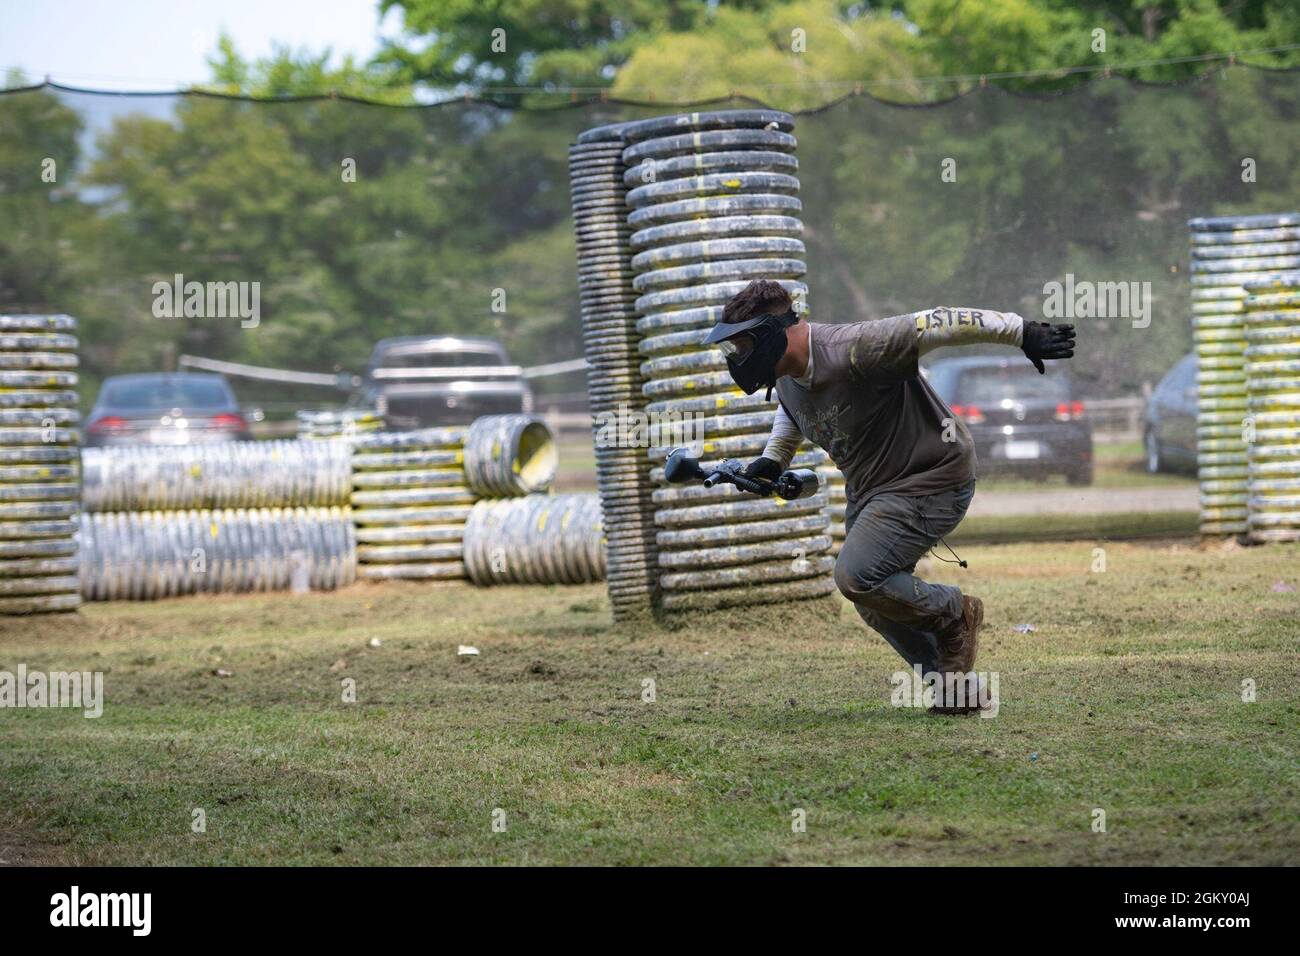 U.S. Navy Machinist’s Mate 2nd Class Ethan Meads, from Jacksonville, Alabama, assigned to the aircraft carrier USS John C. Stennis (CVN 74), sprints across a paintball field during a Morale, Welfare, and Recreation event, in Hampton, Virginia, July 22, 2021. John C. Stennis is in Newport News Shipyard working alongside NNS, NAVSEA and contractors conducting Refueling and Complex Overhaul as part of the mission to deliver the warship back in the fight, on time and on budget, to resume its duty of defending the United States. Stock Photo